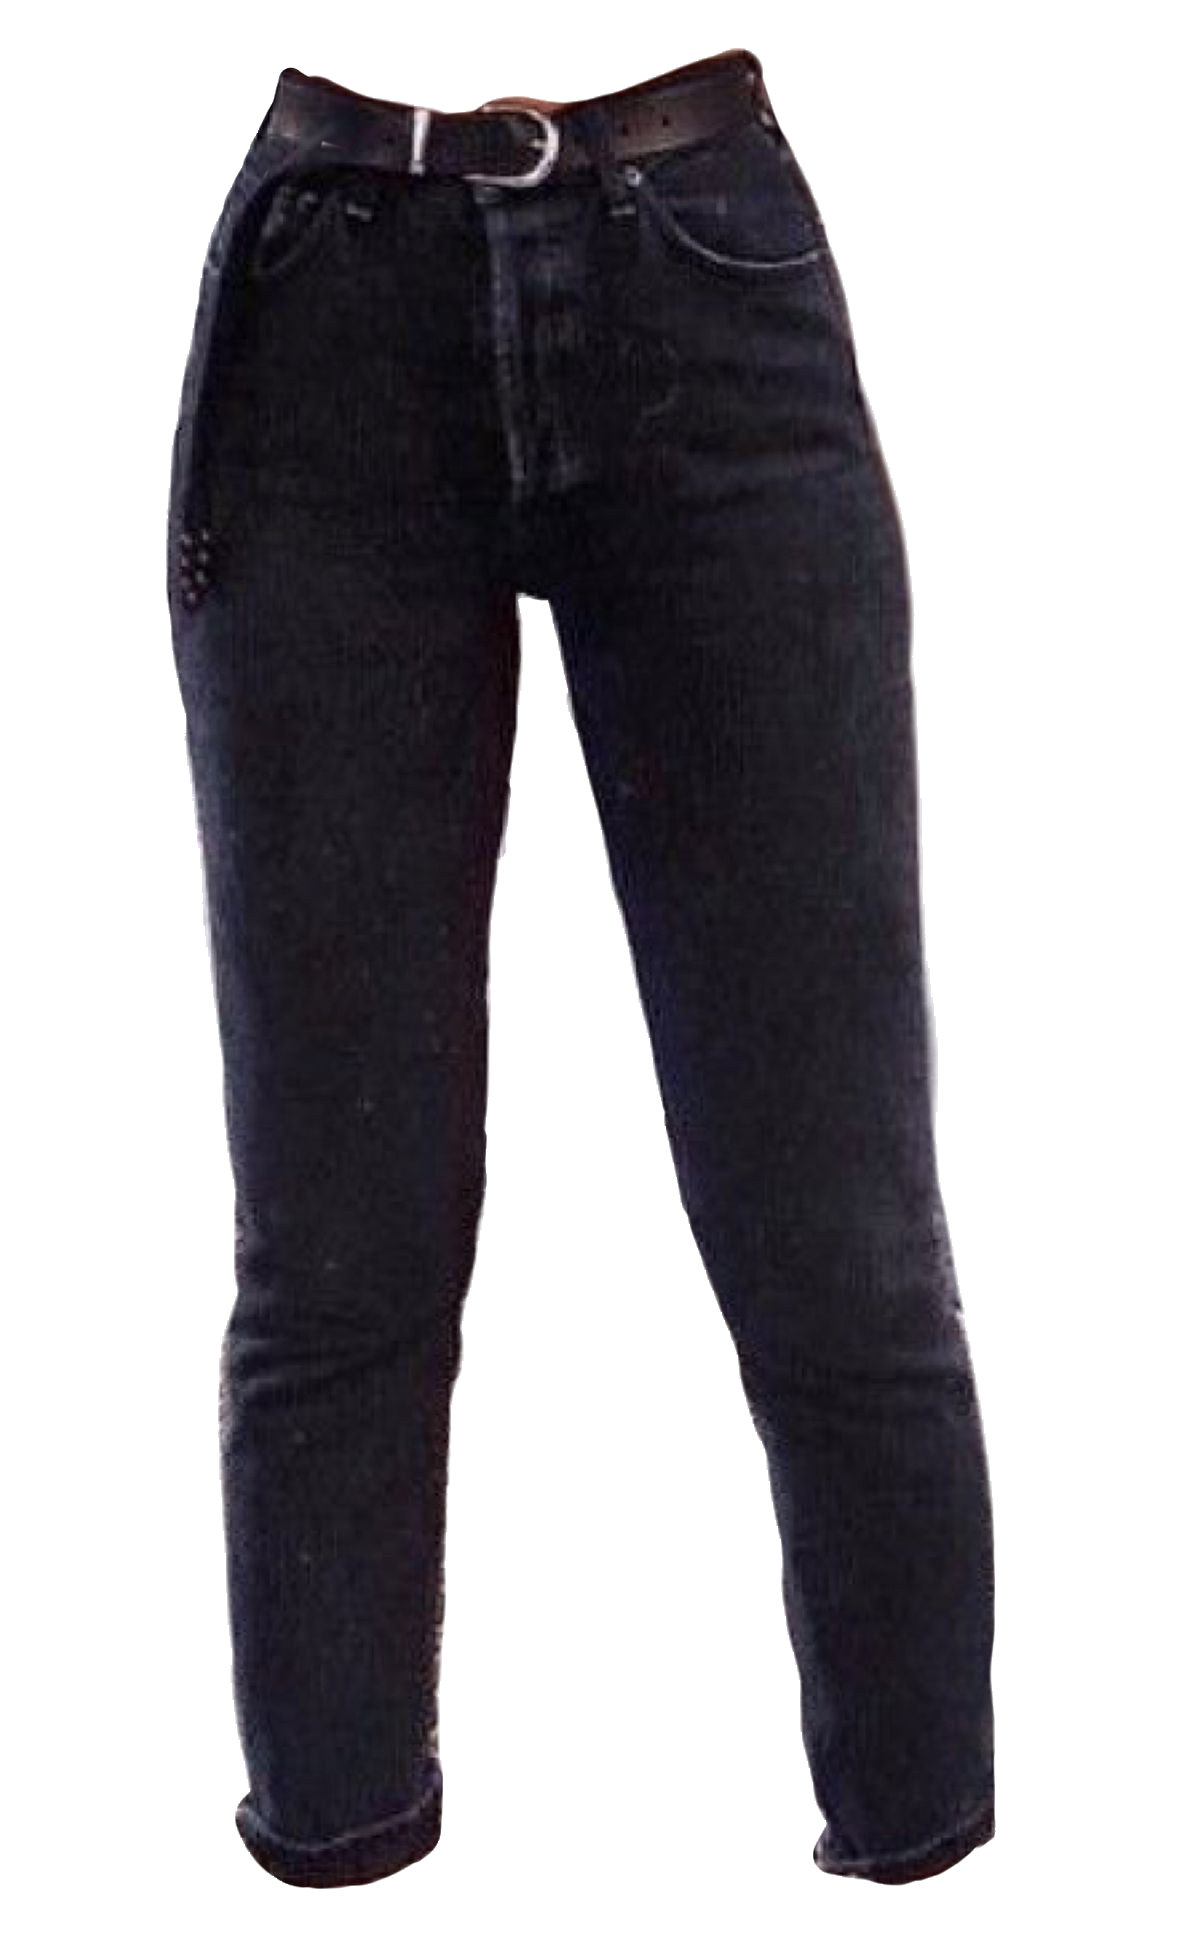 Black Jeans PNG Picture